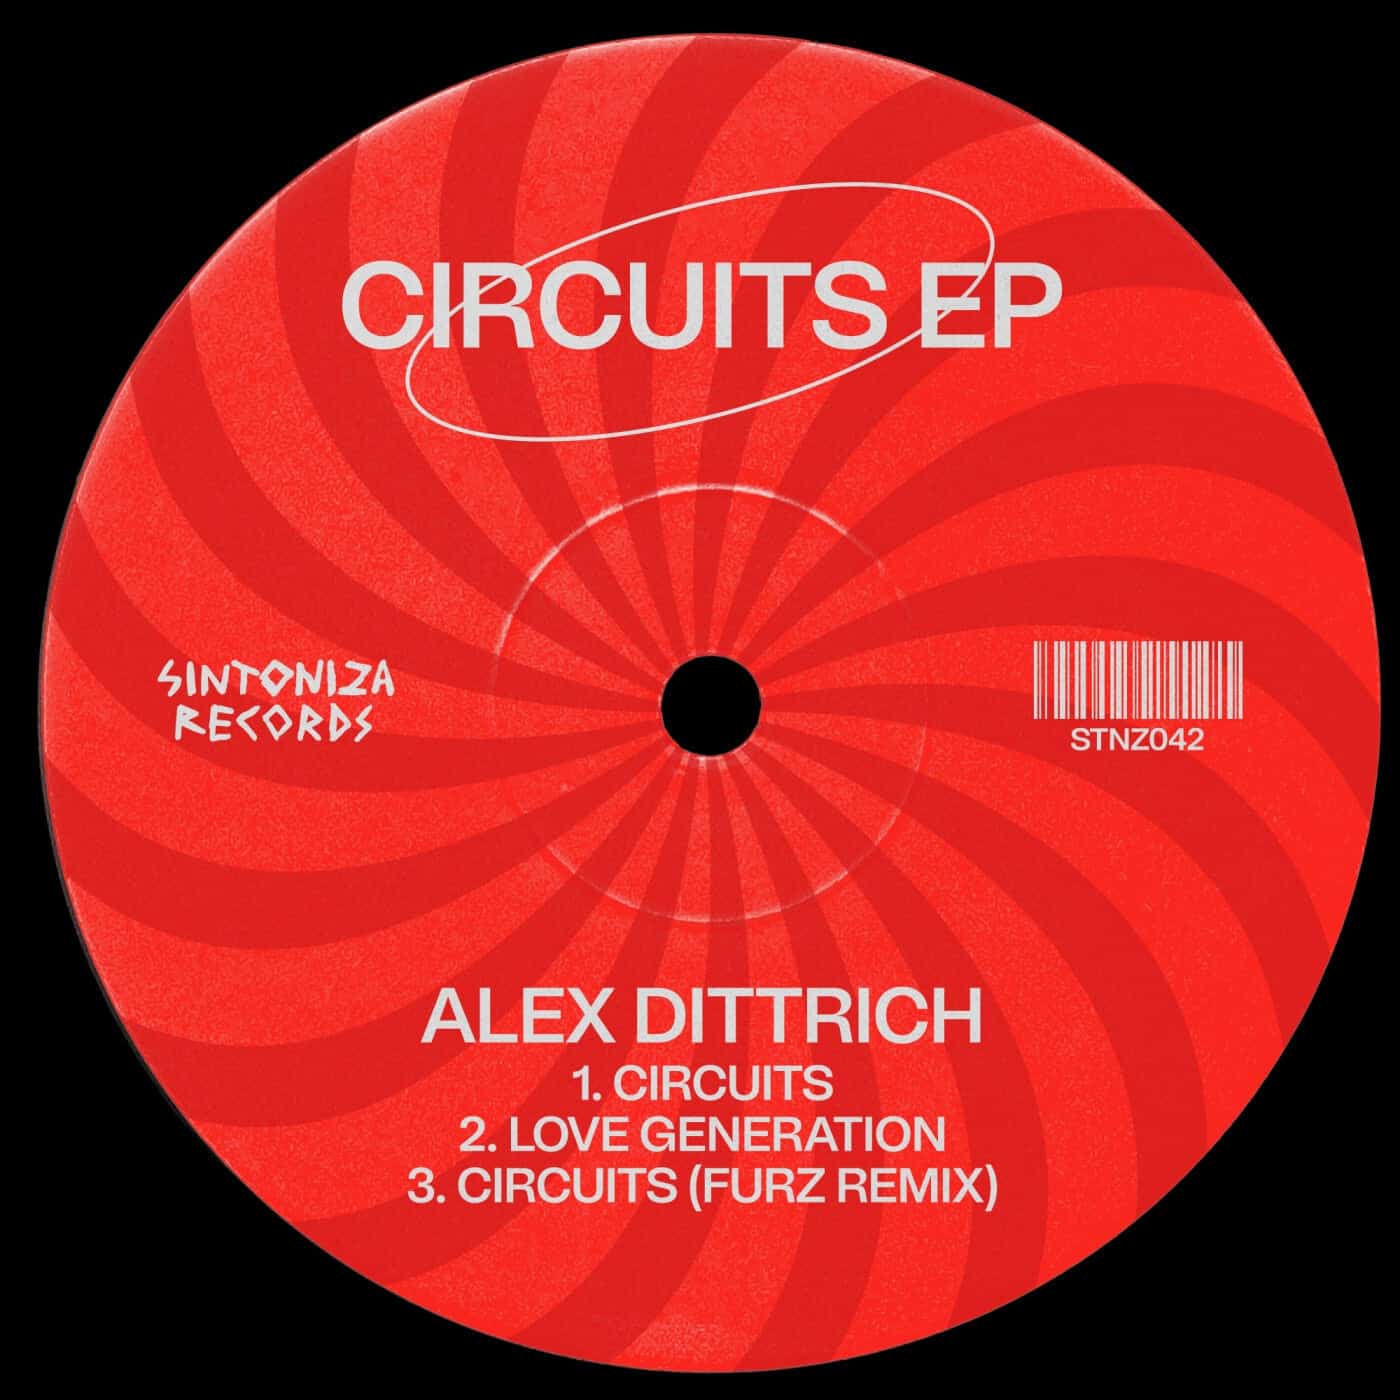 image cover: Circuits by Alex Dittrich on Sintoniza Records